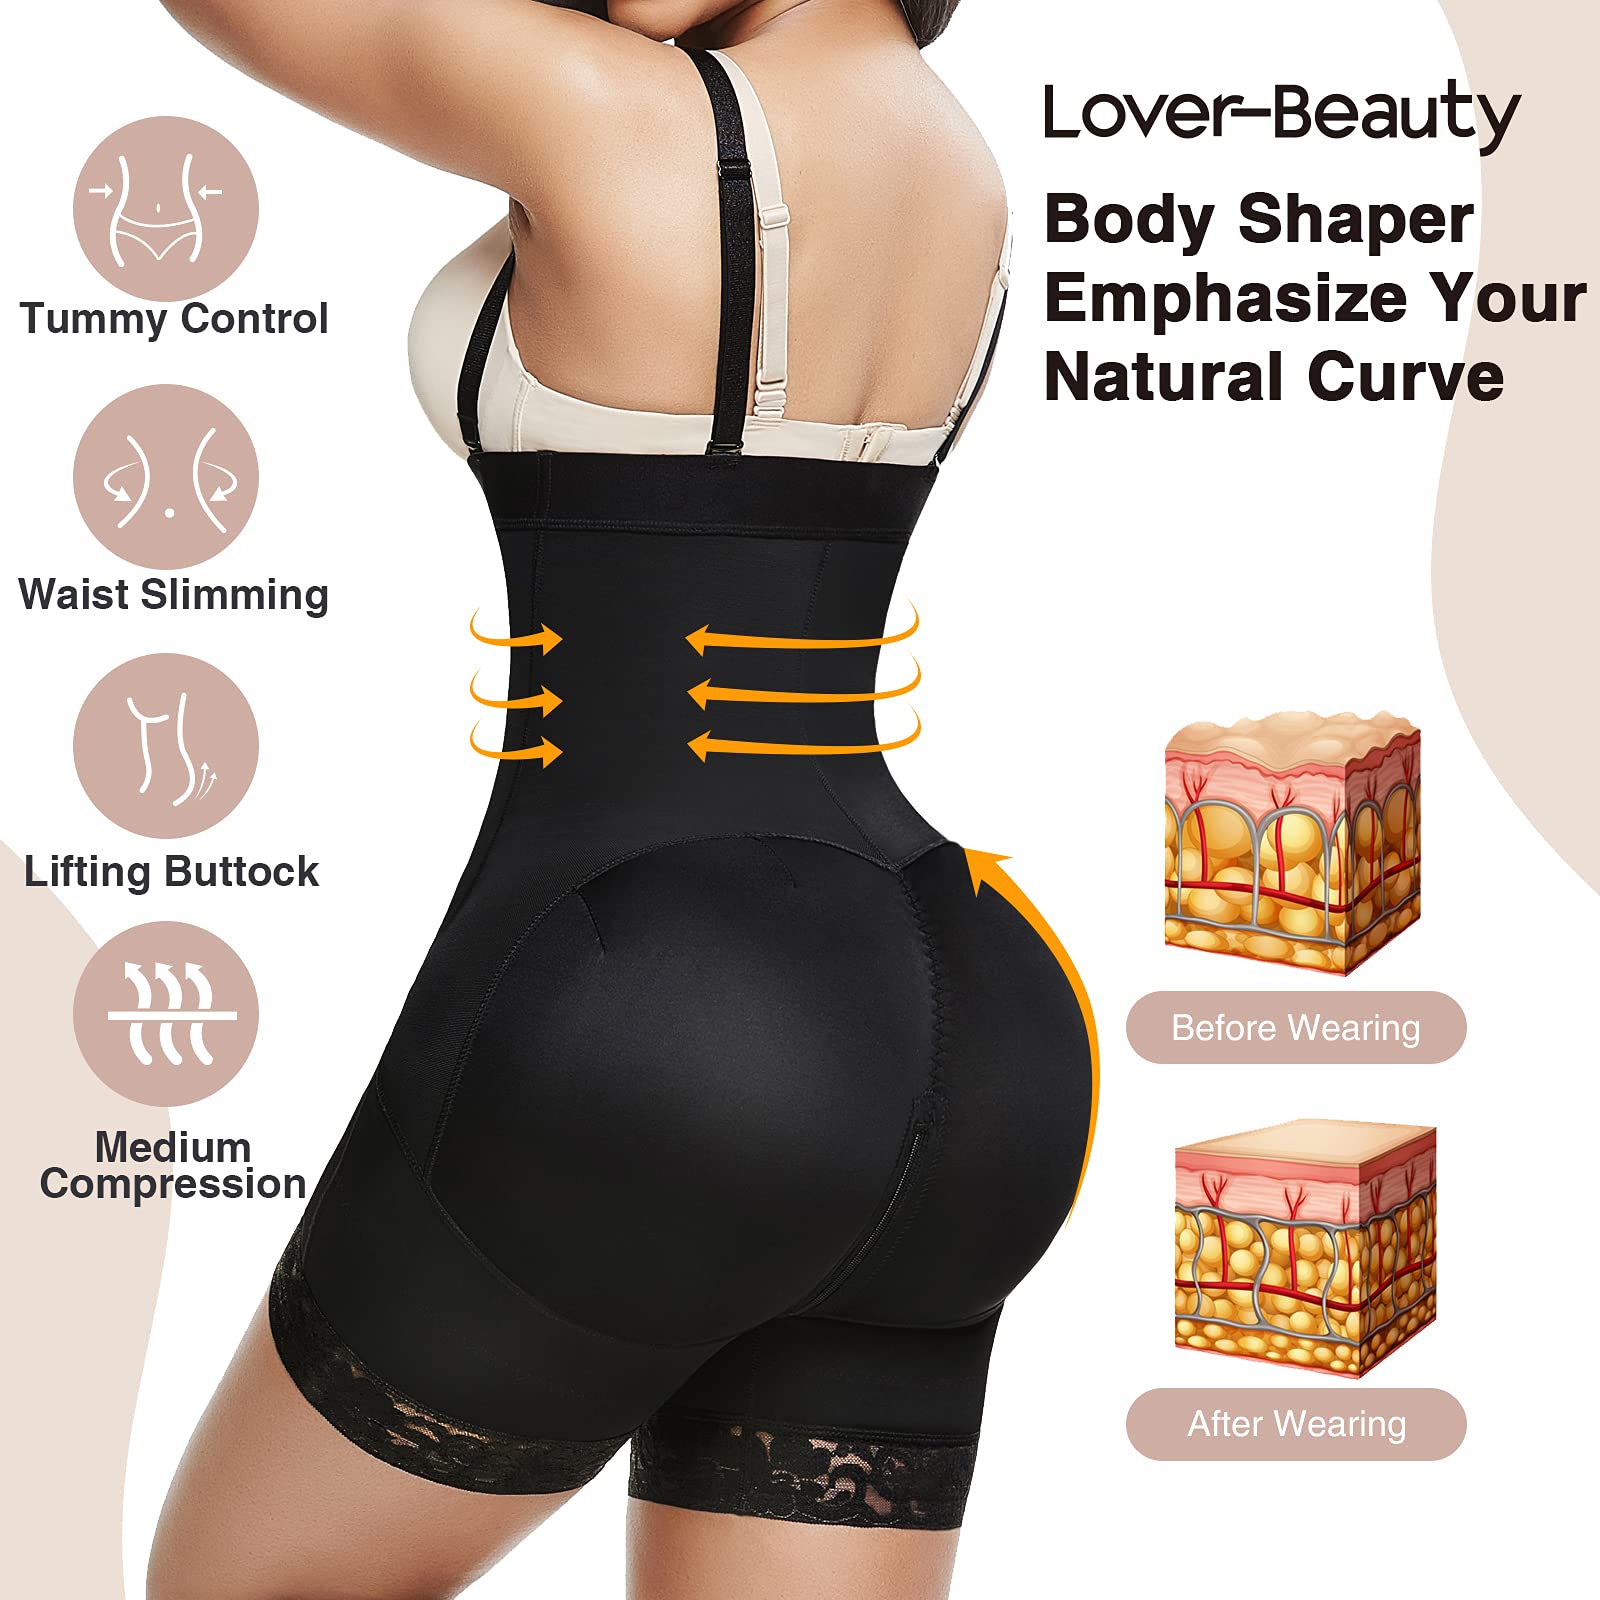 Buy Lover-Beauty Comfy BBL Stage 2 Fajas Colombians Shapewear for